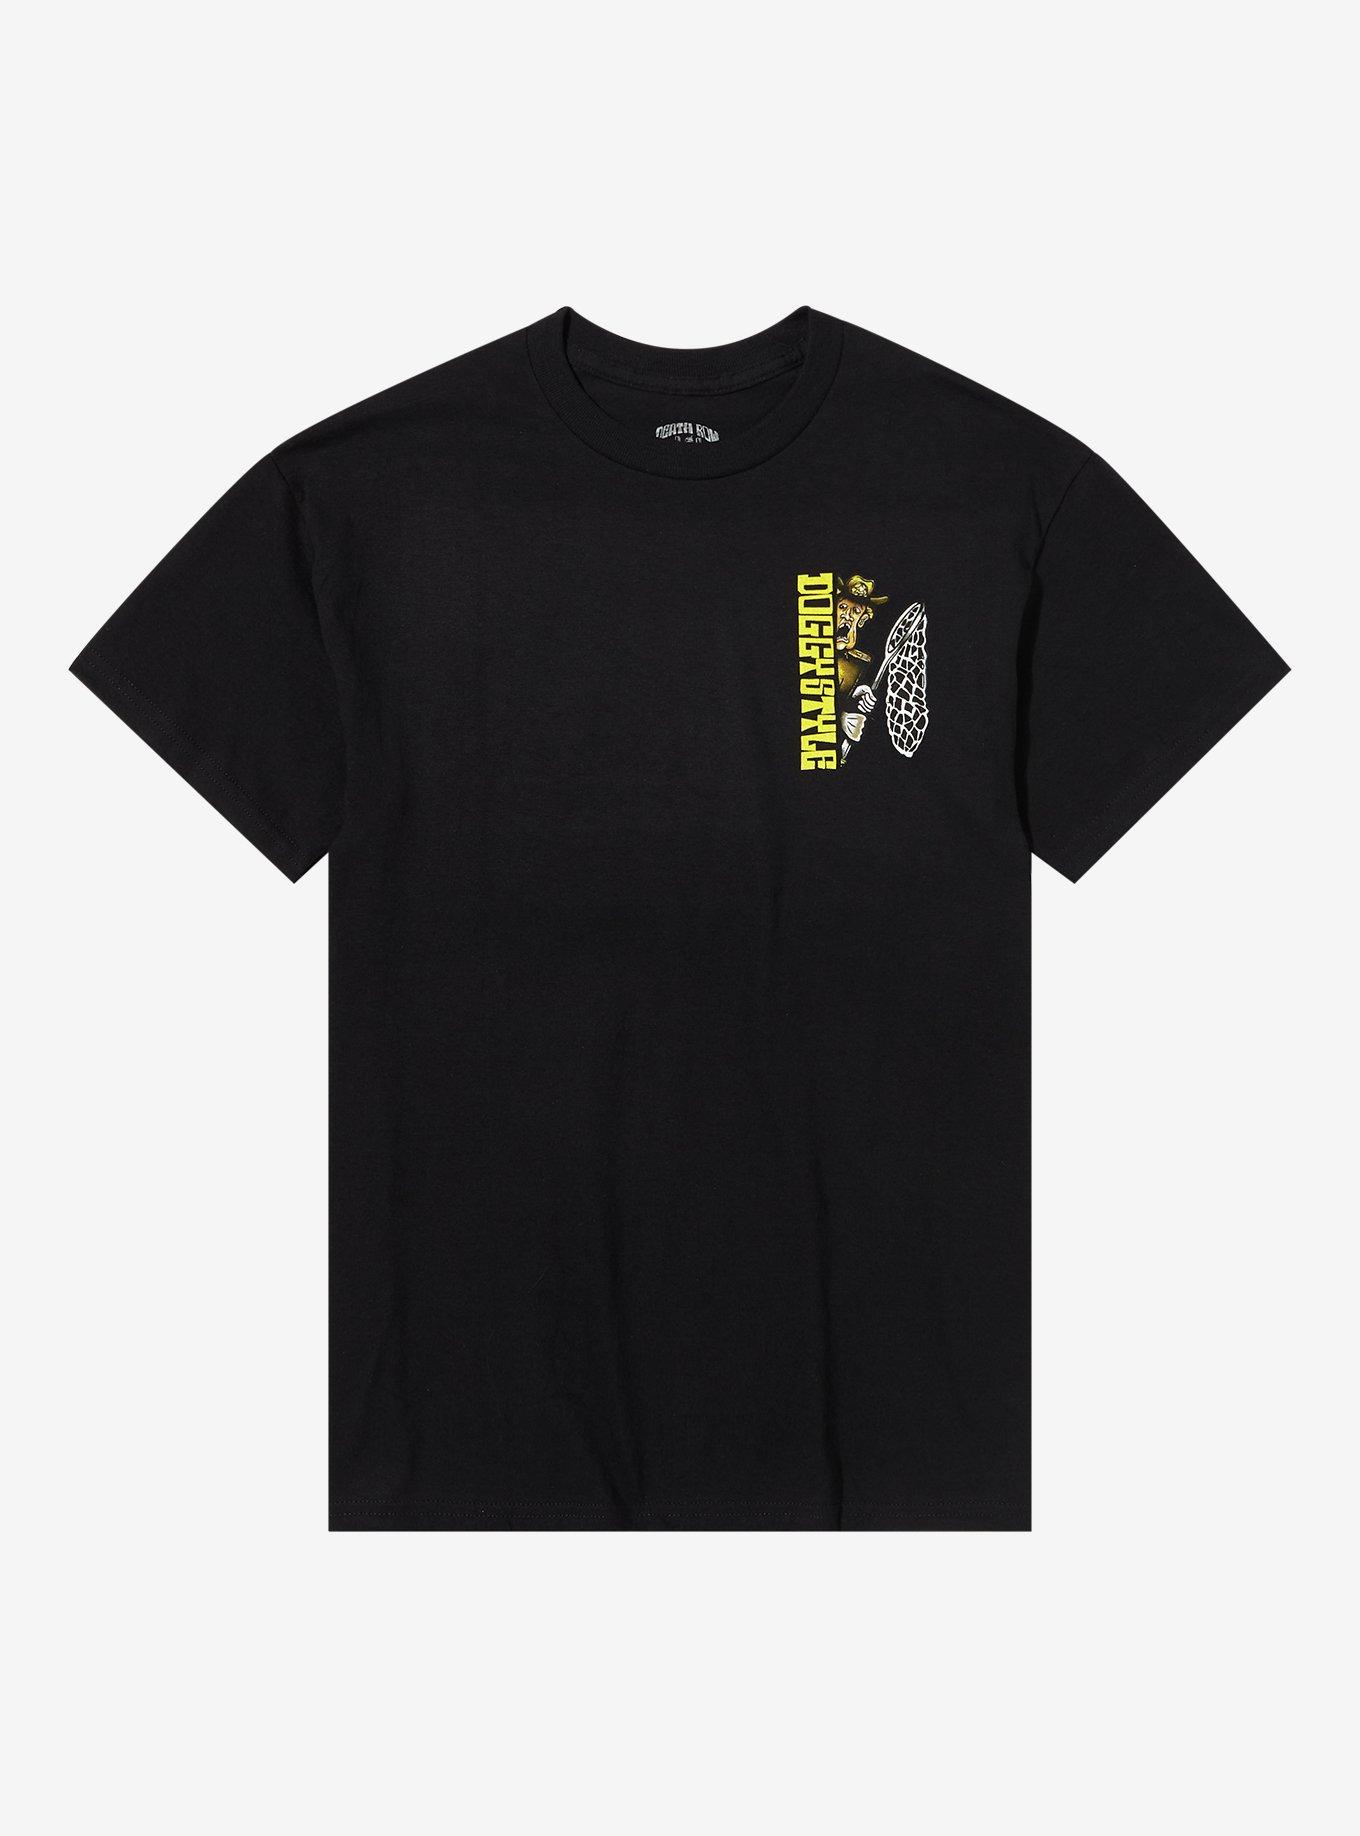 Snoop Dogg Doggystyle 30th Anniversary T-Shirt | Hot Topic